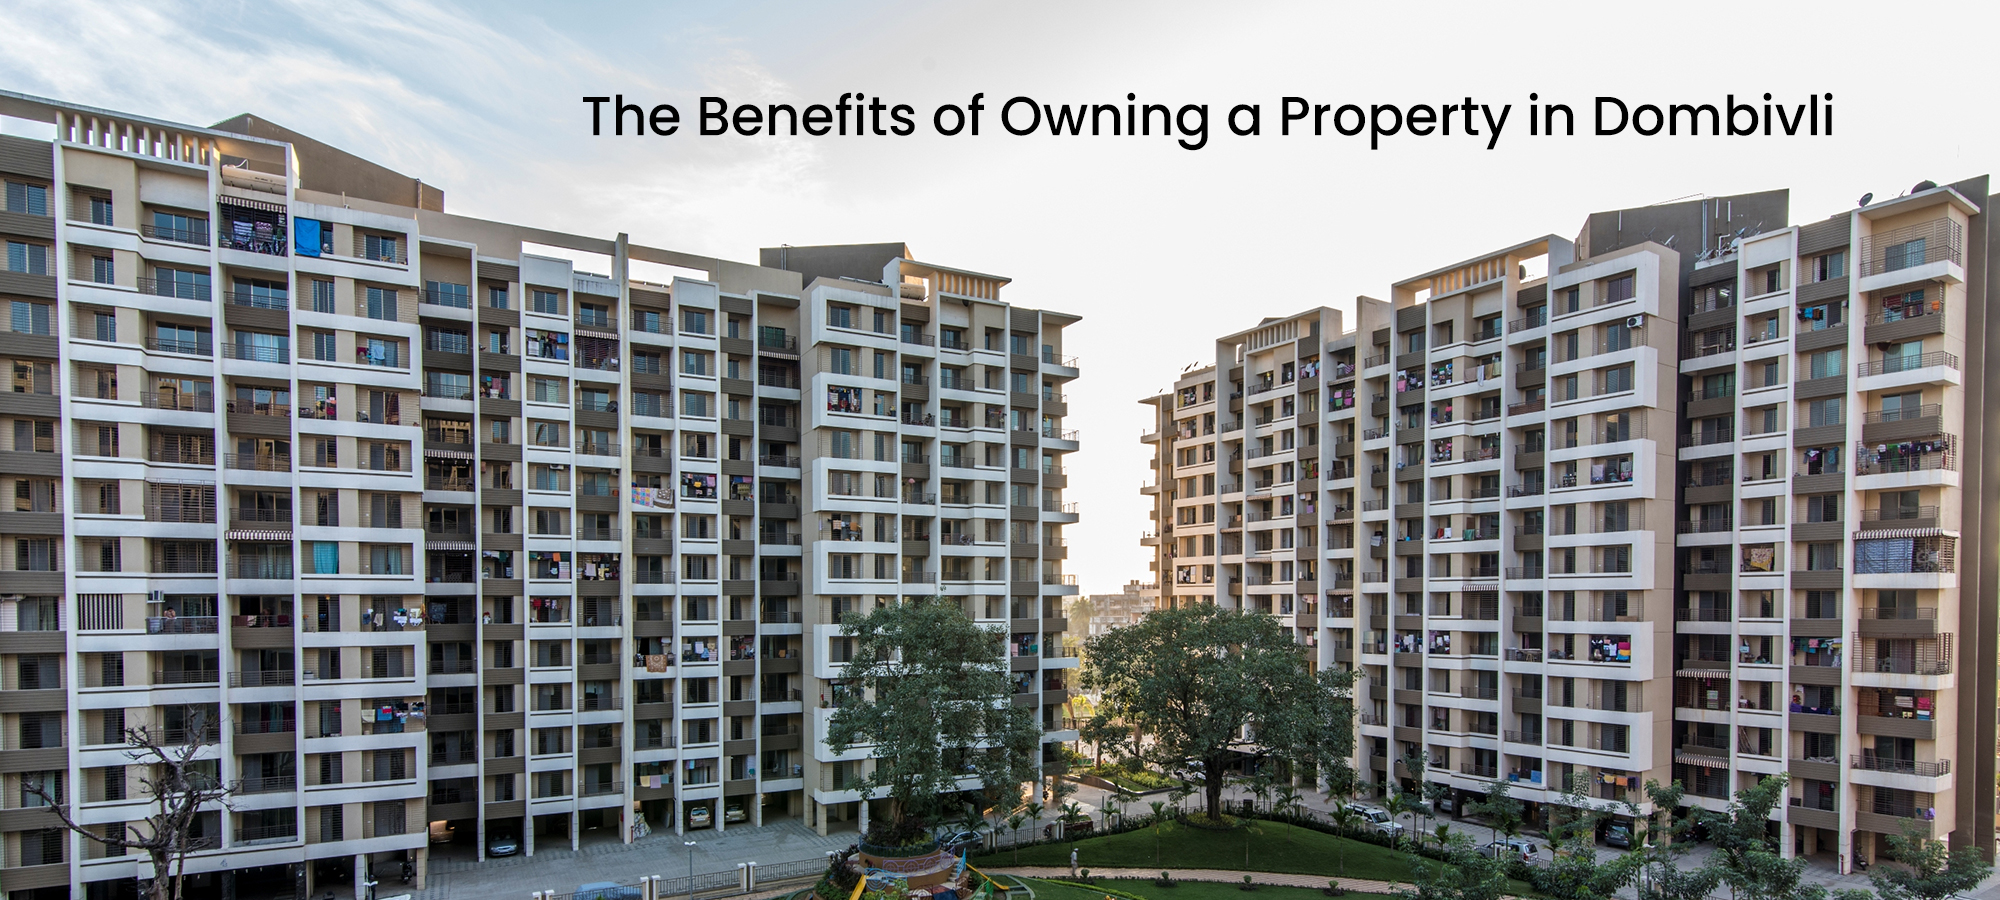 The Benefits of Owning a Property in Dombivli